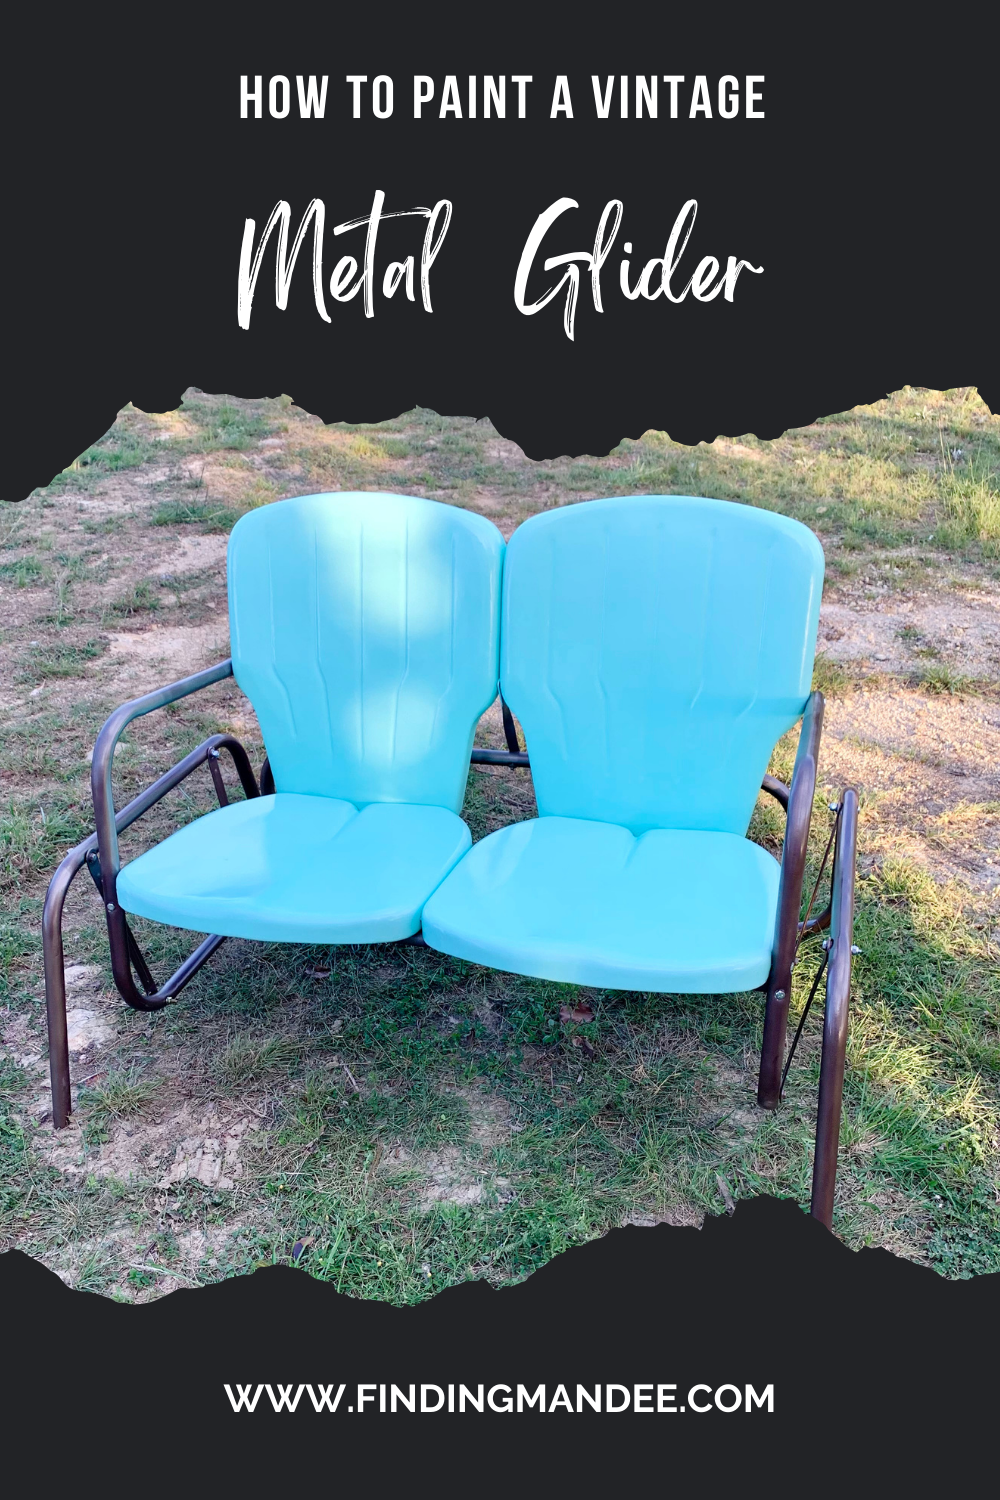 How to Paint a Vintage Metal Glider | Finding Mandee